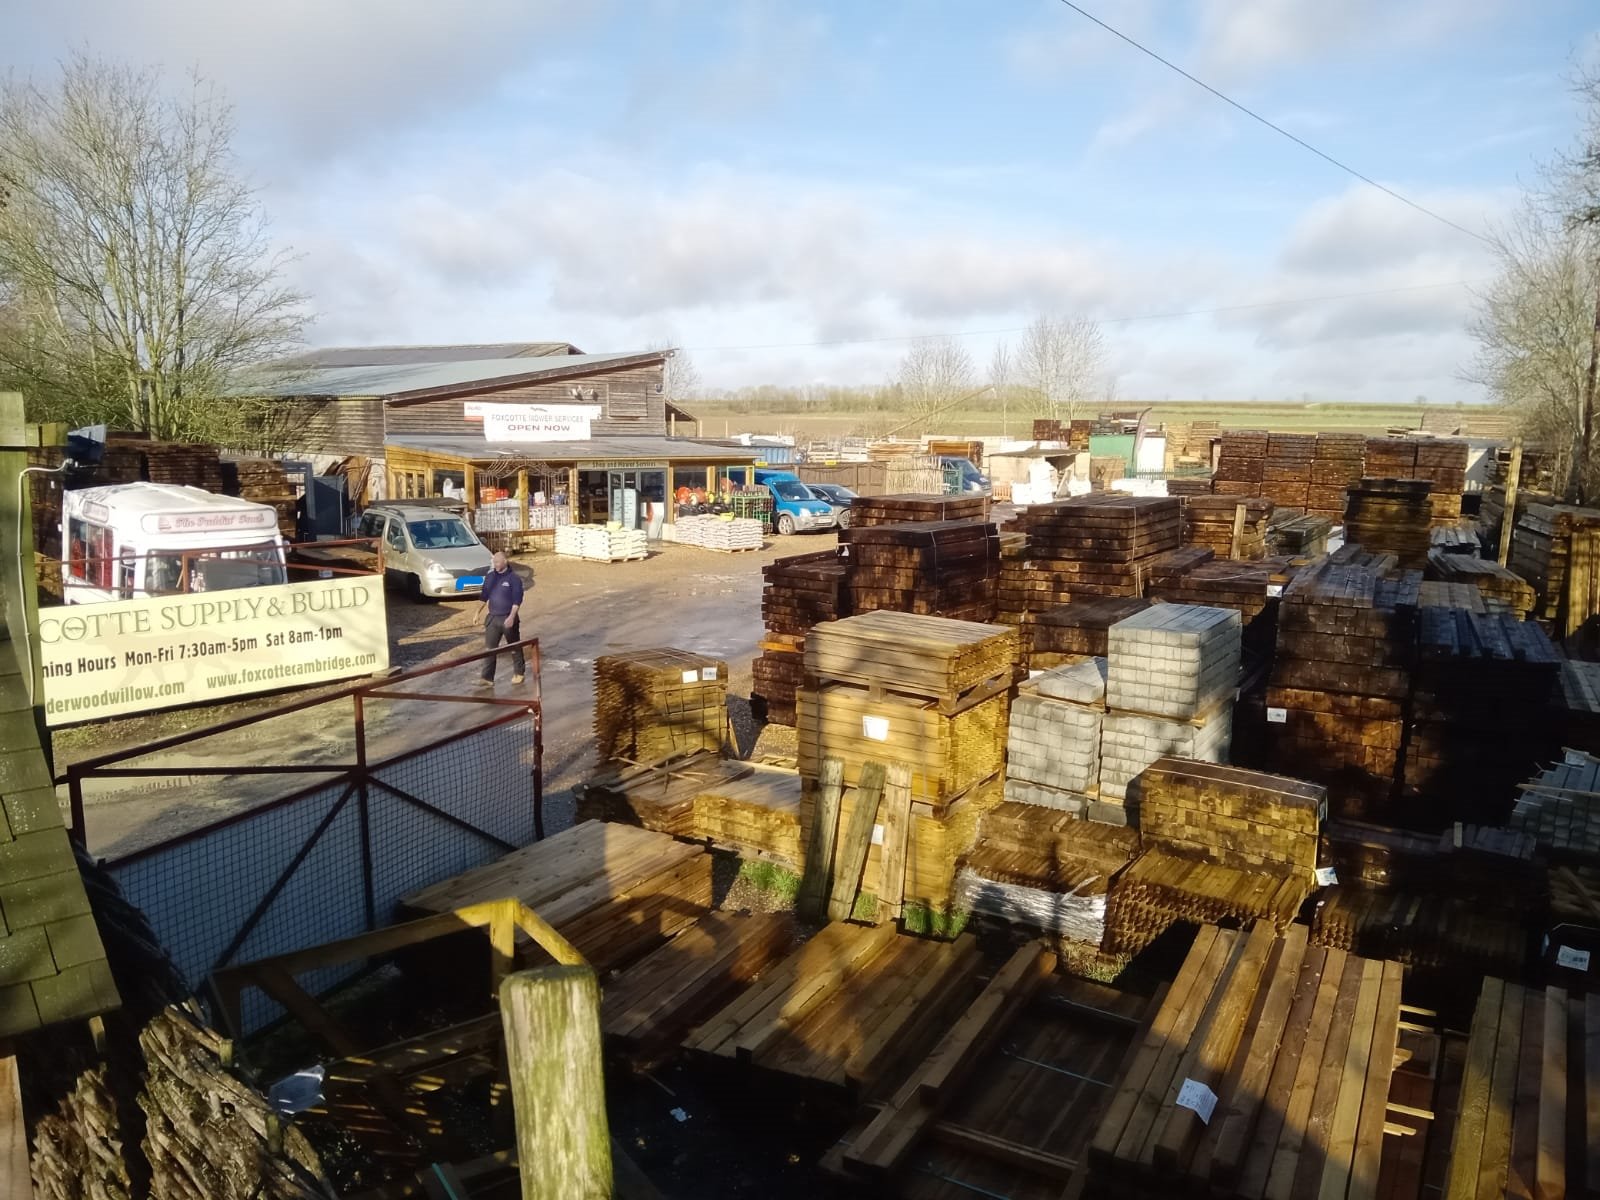  Timber yard selling fencing, trellis, posts, gates, panels, gravel boards, mot, hurdles, cant rails, feather edge, and post mix. Delivery service available. 